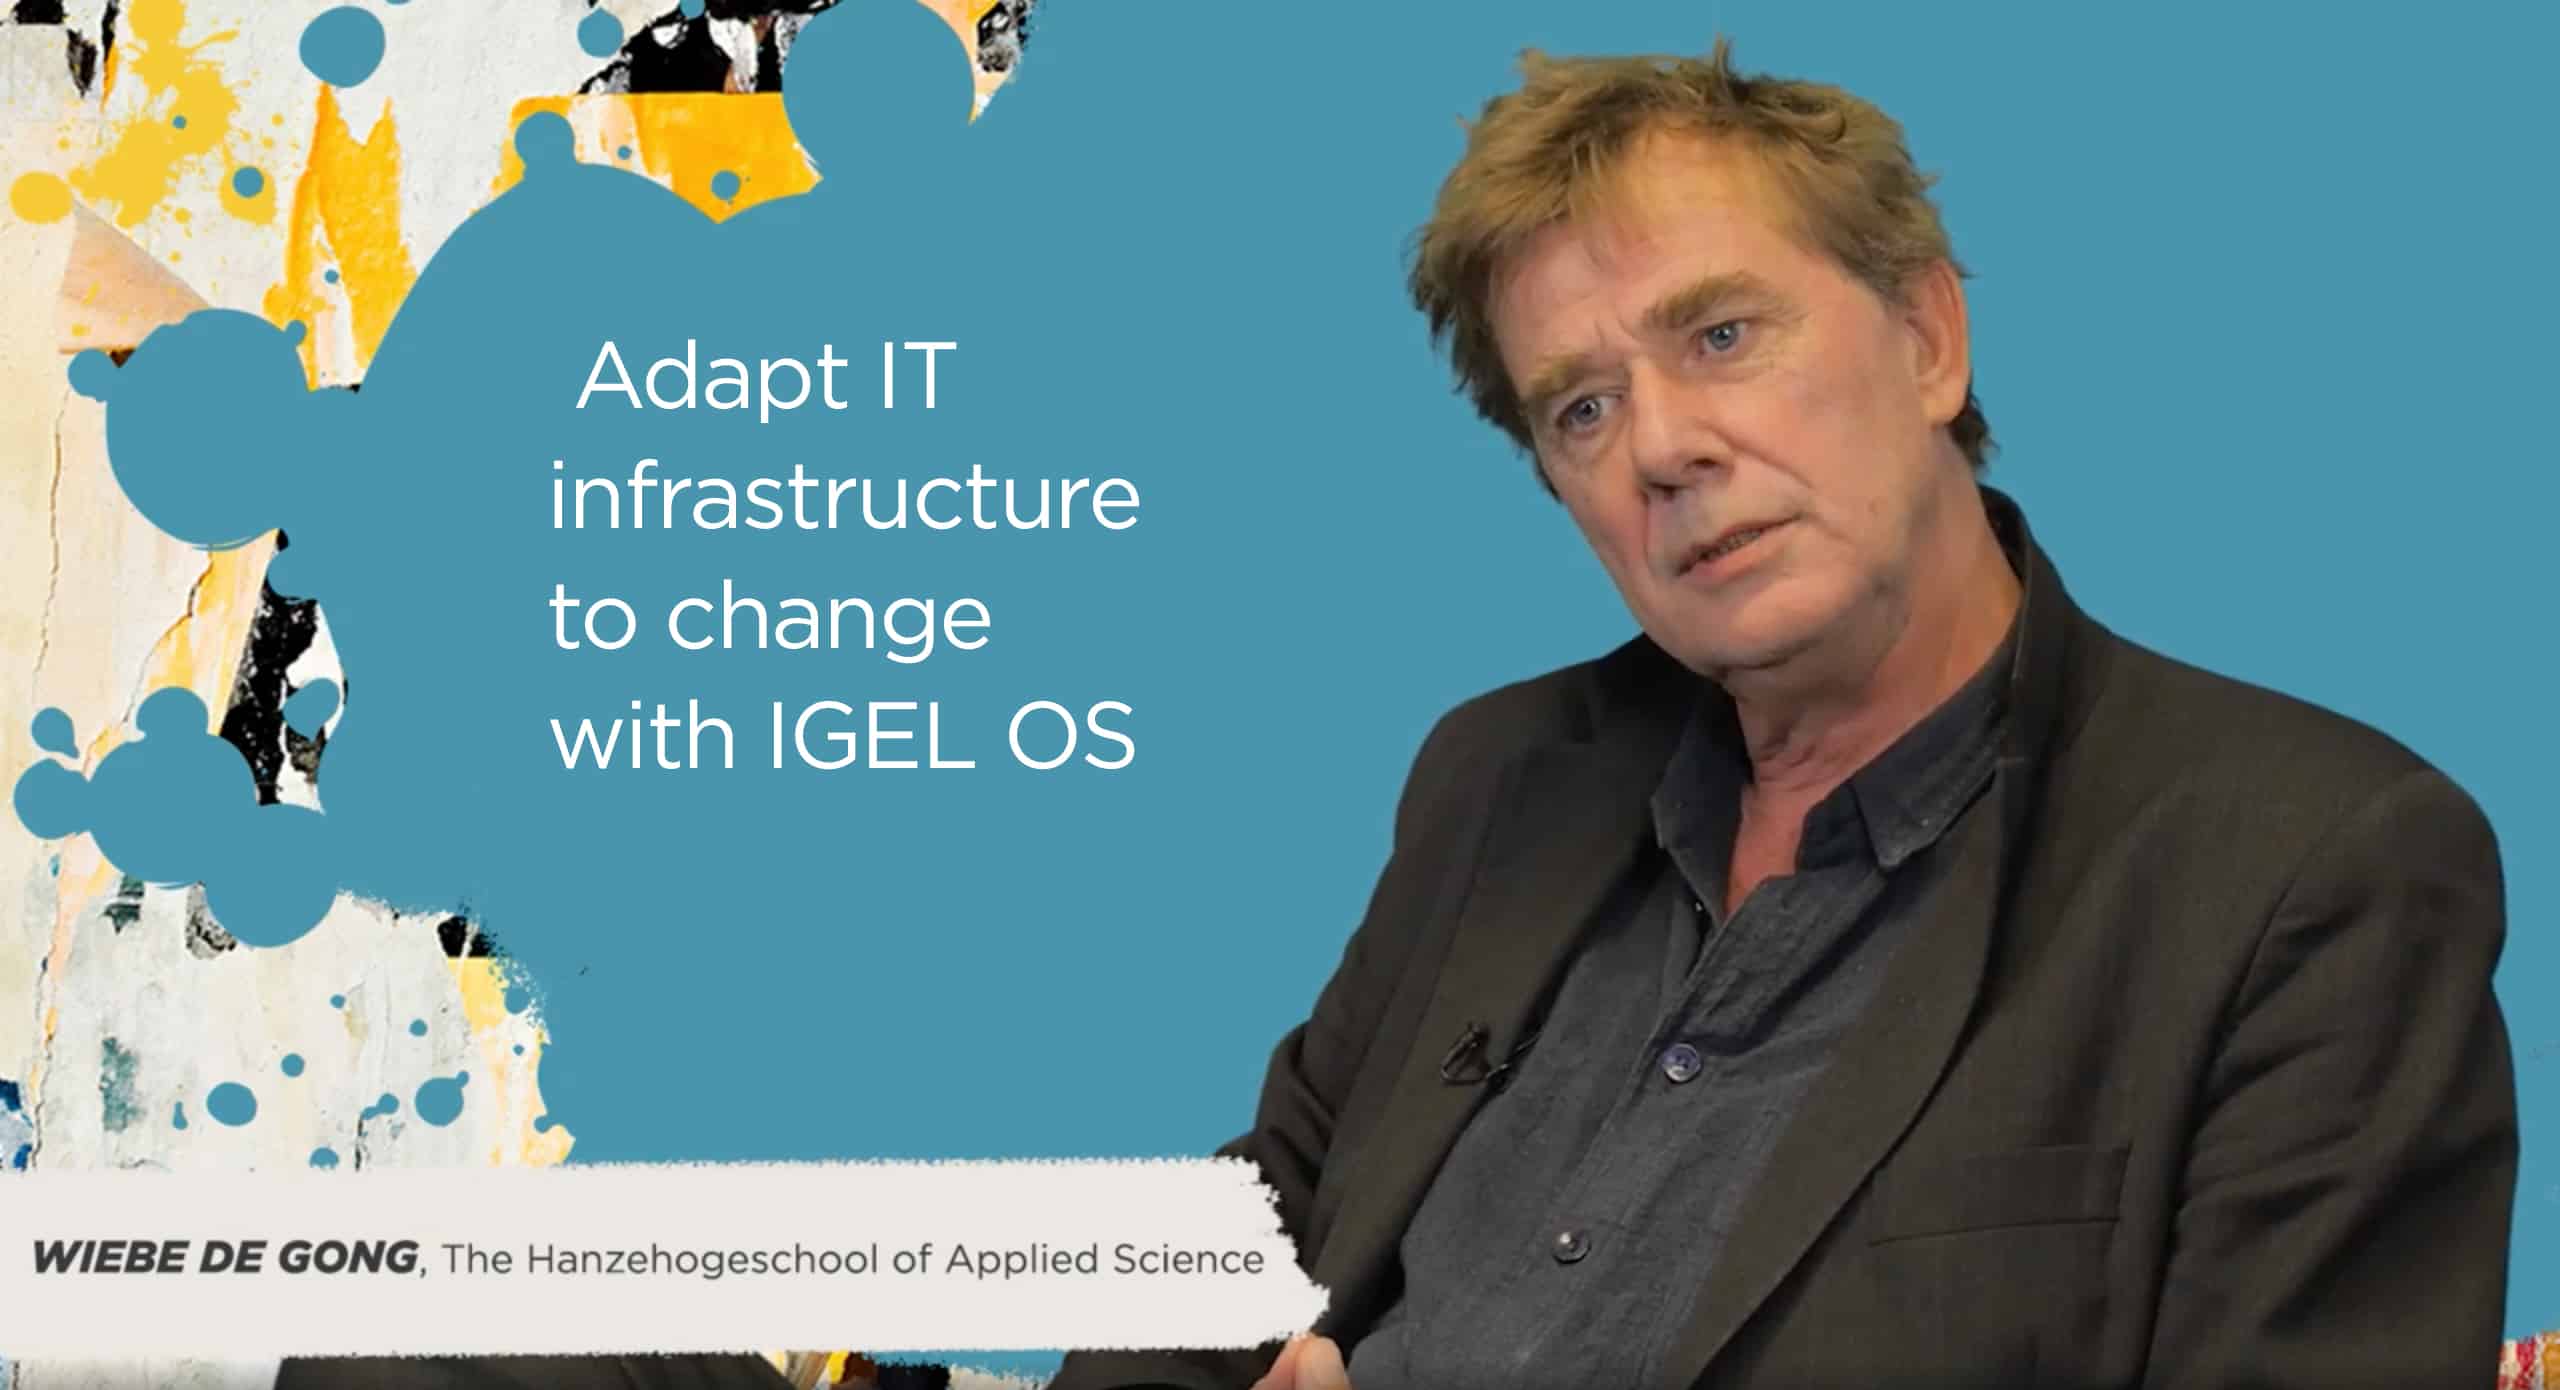 Adapt IT infrastructure to change with IGEL OS